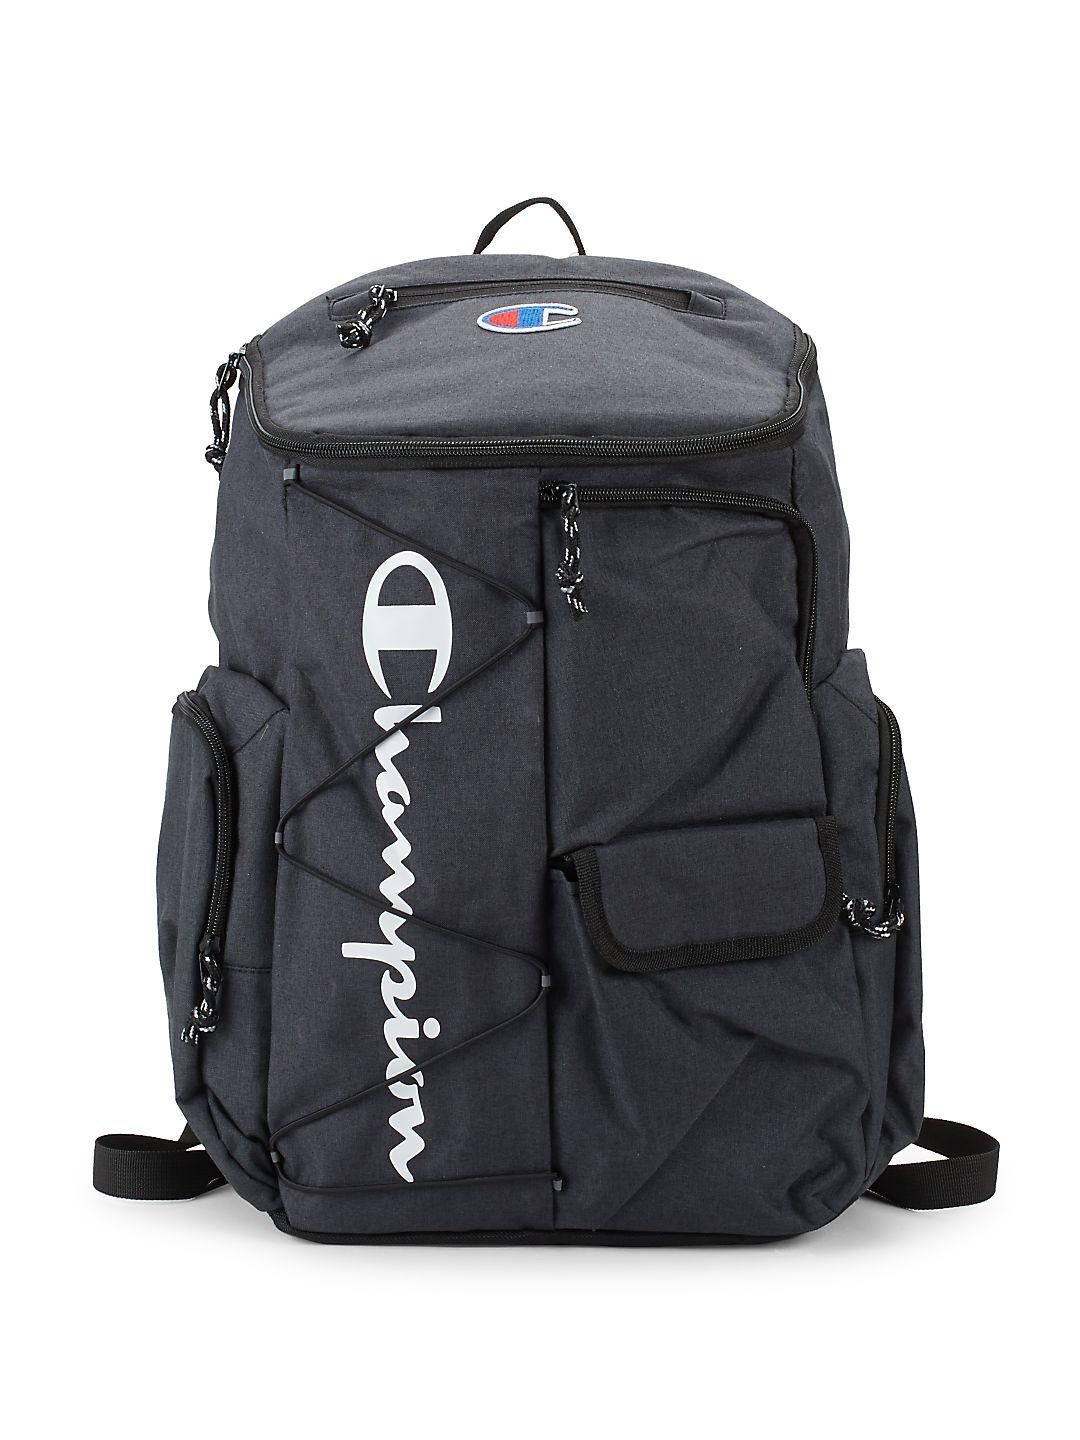 Rare Champion Utility Backpack